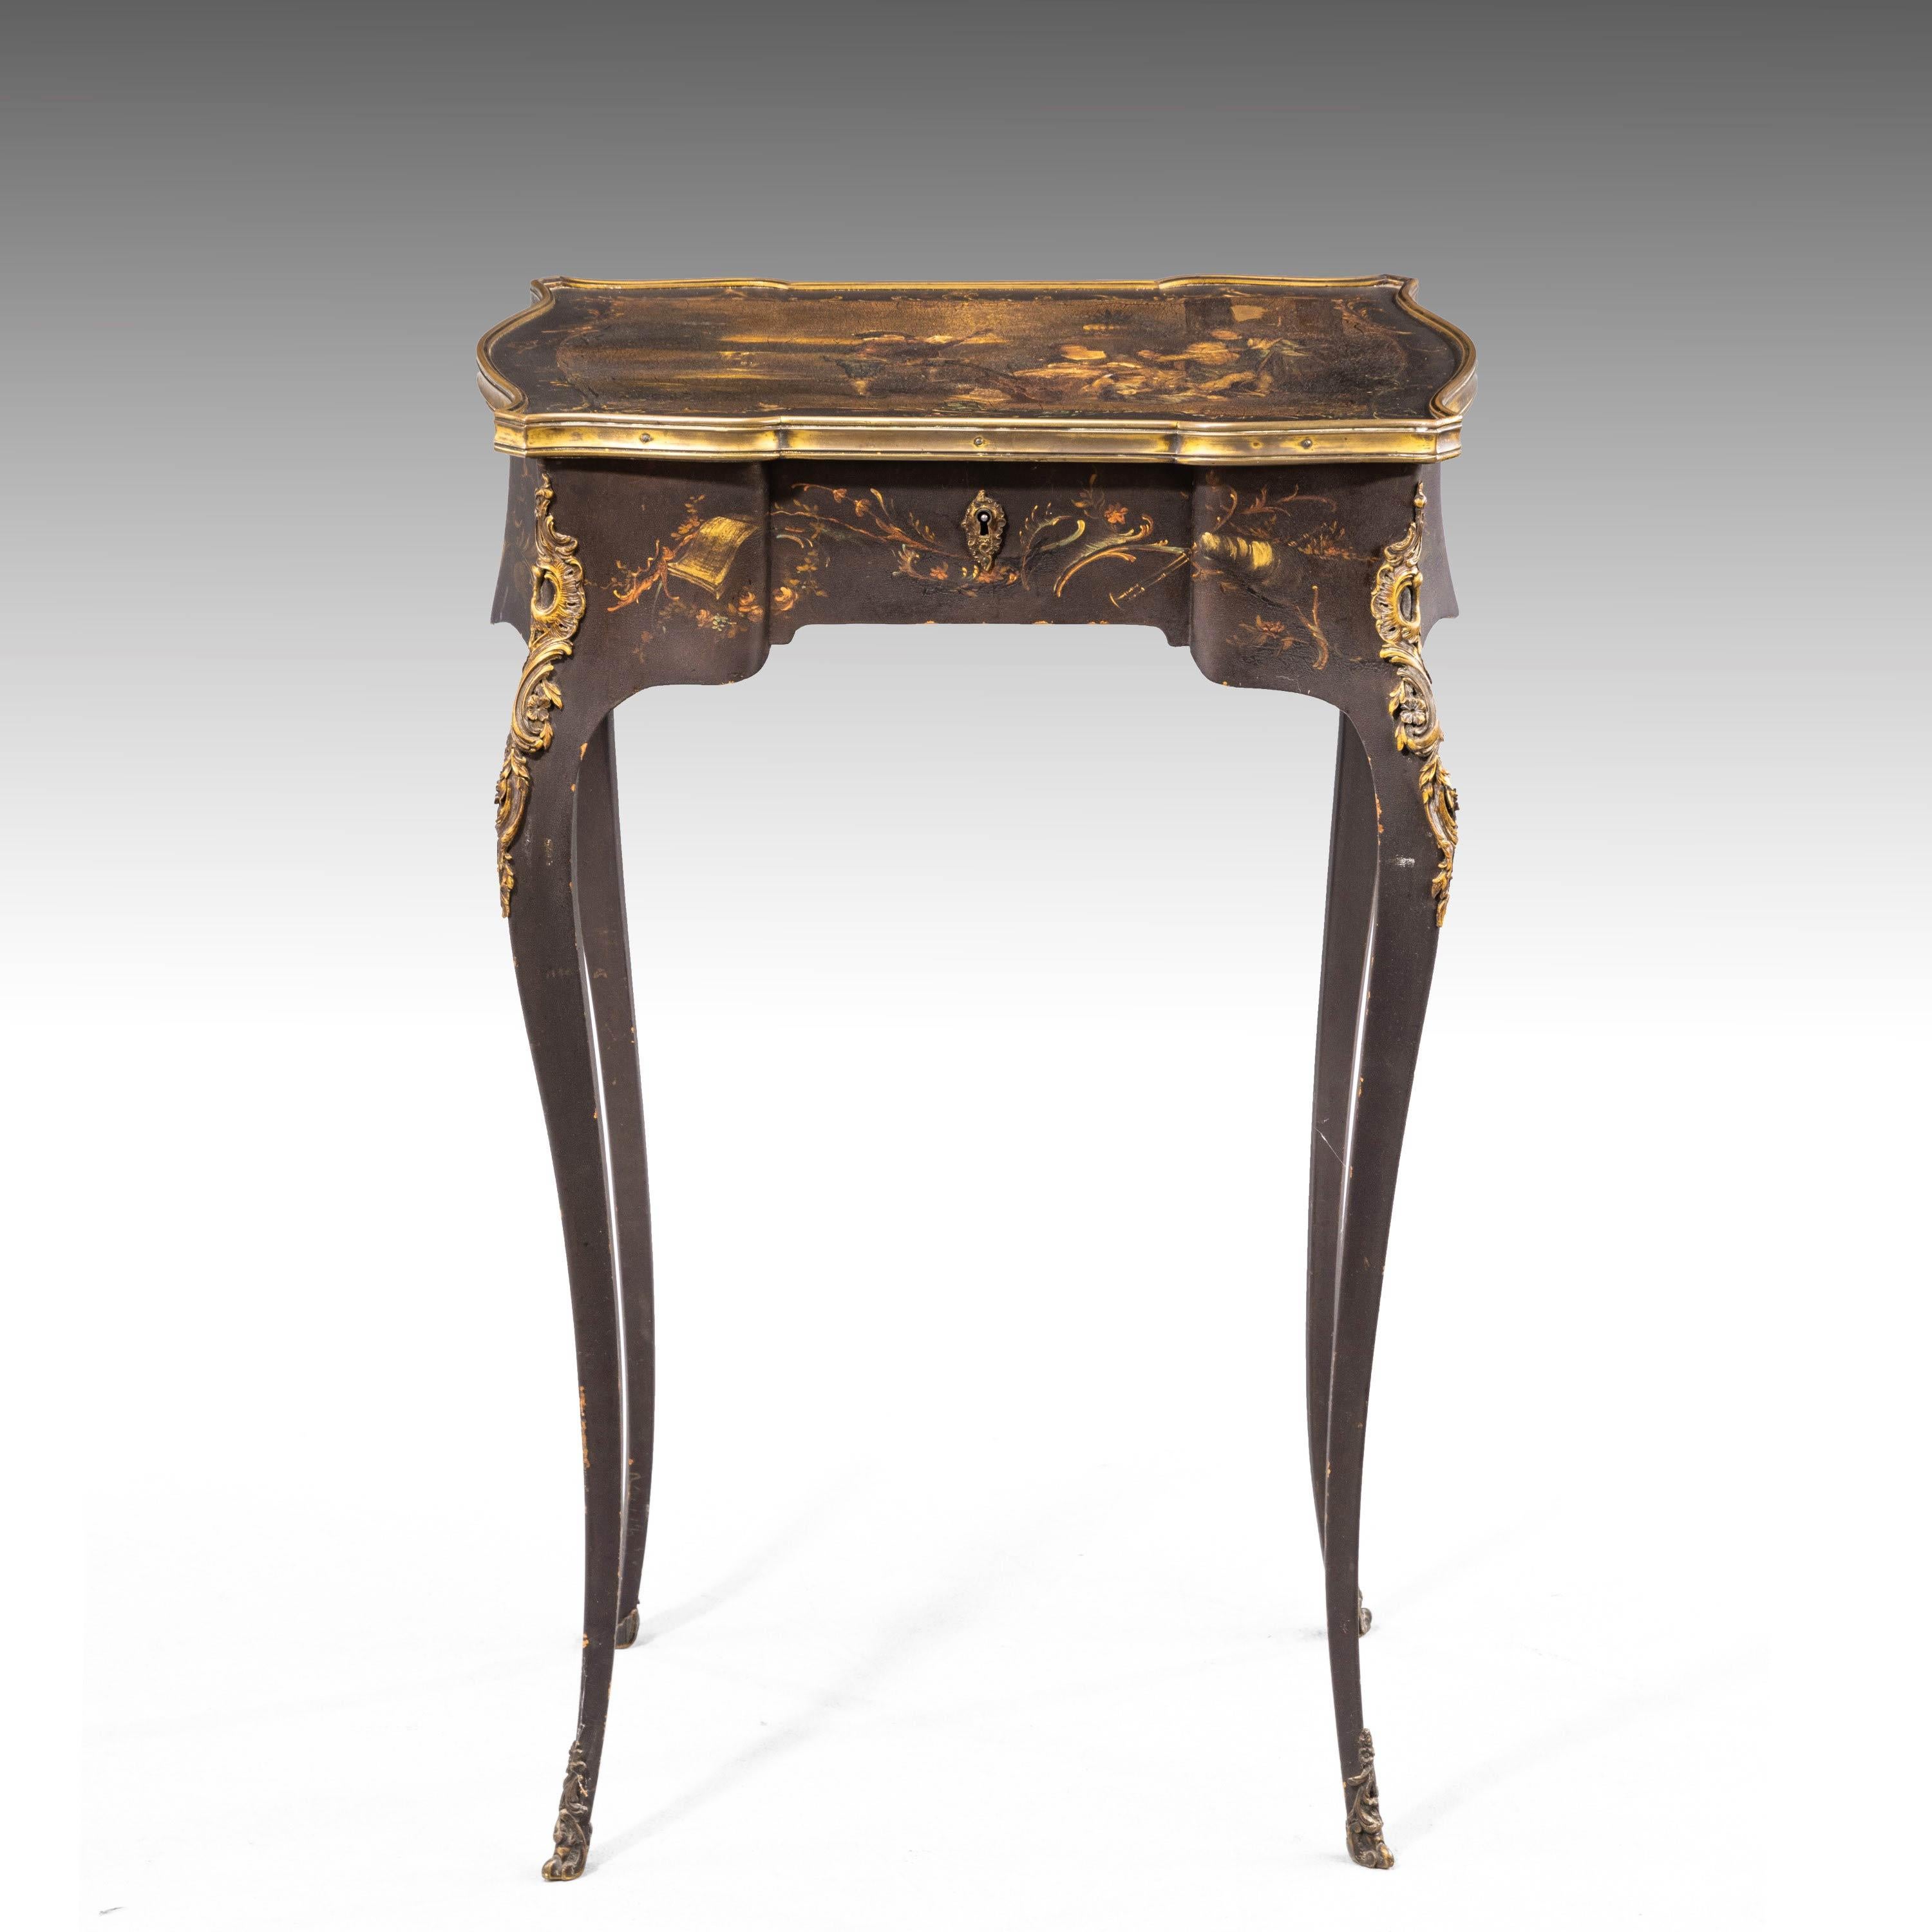 A Vernis Martin French work table. On finely shaped cabriole supports. Retaining the original gilt bronze mounts, now oxidised. The top with a finely painted Watteauesque scene but now heavily oxidised.
 